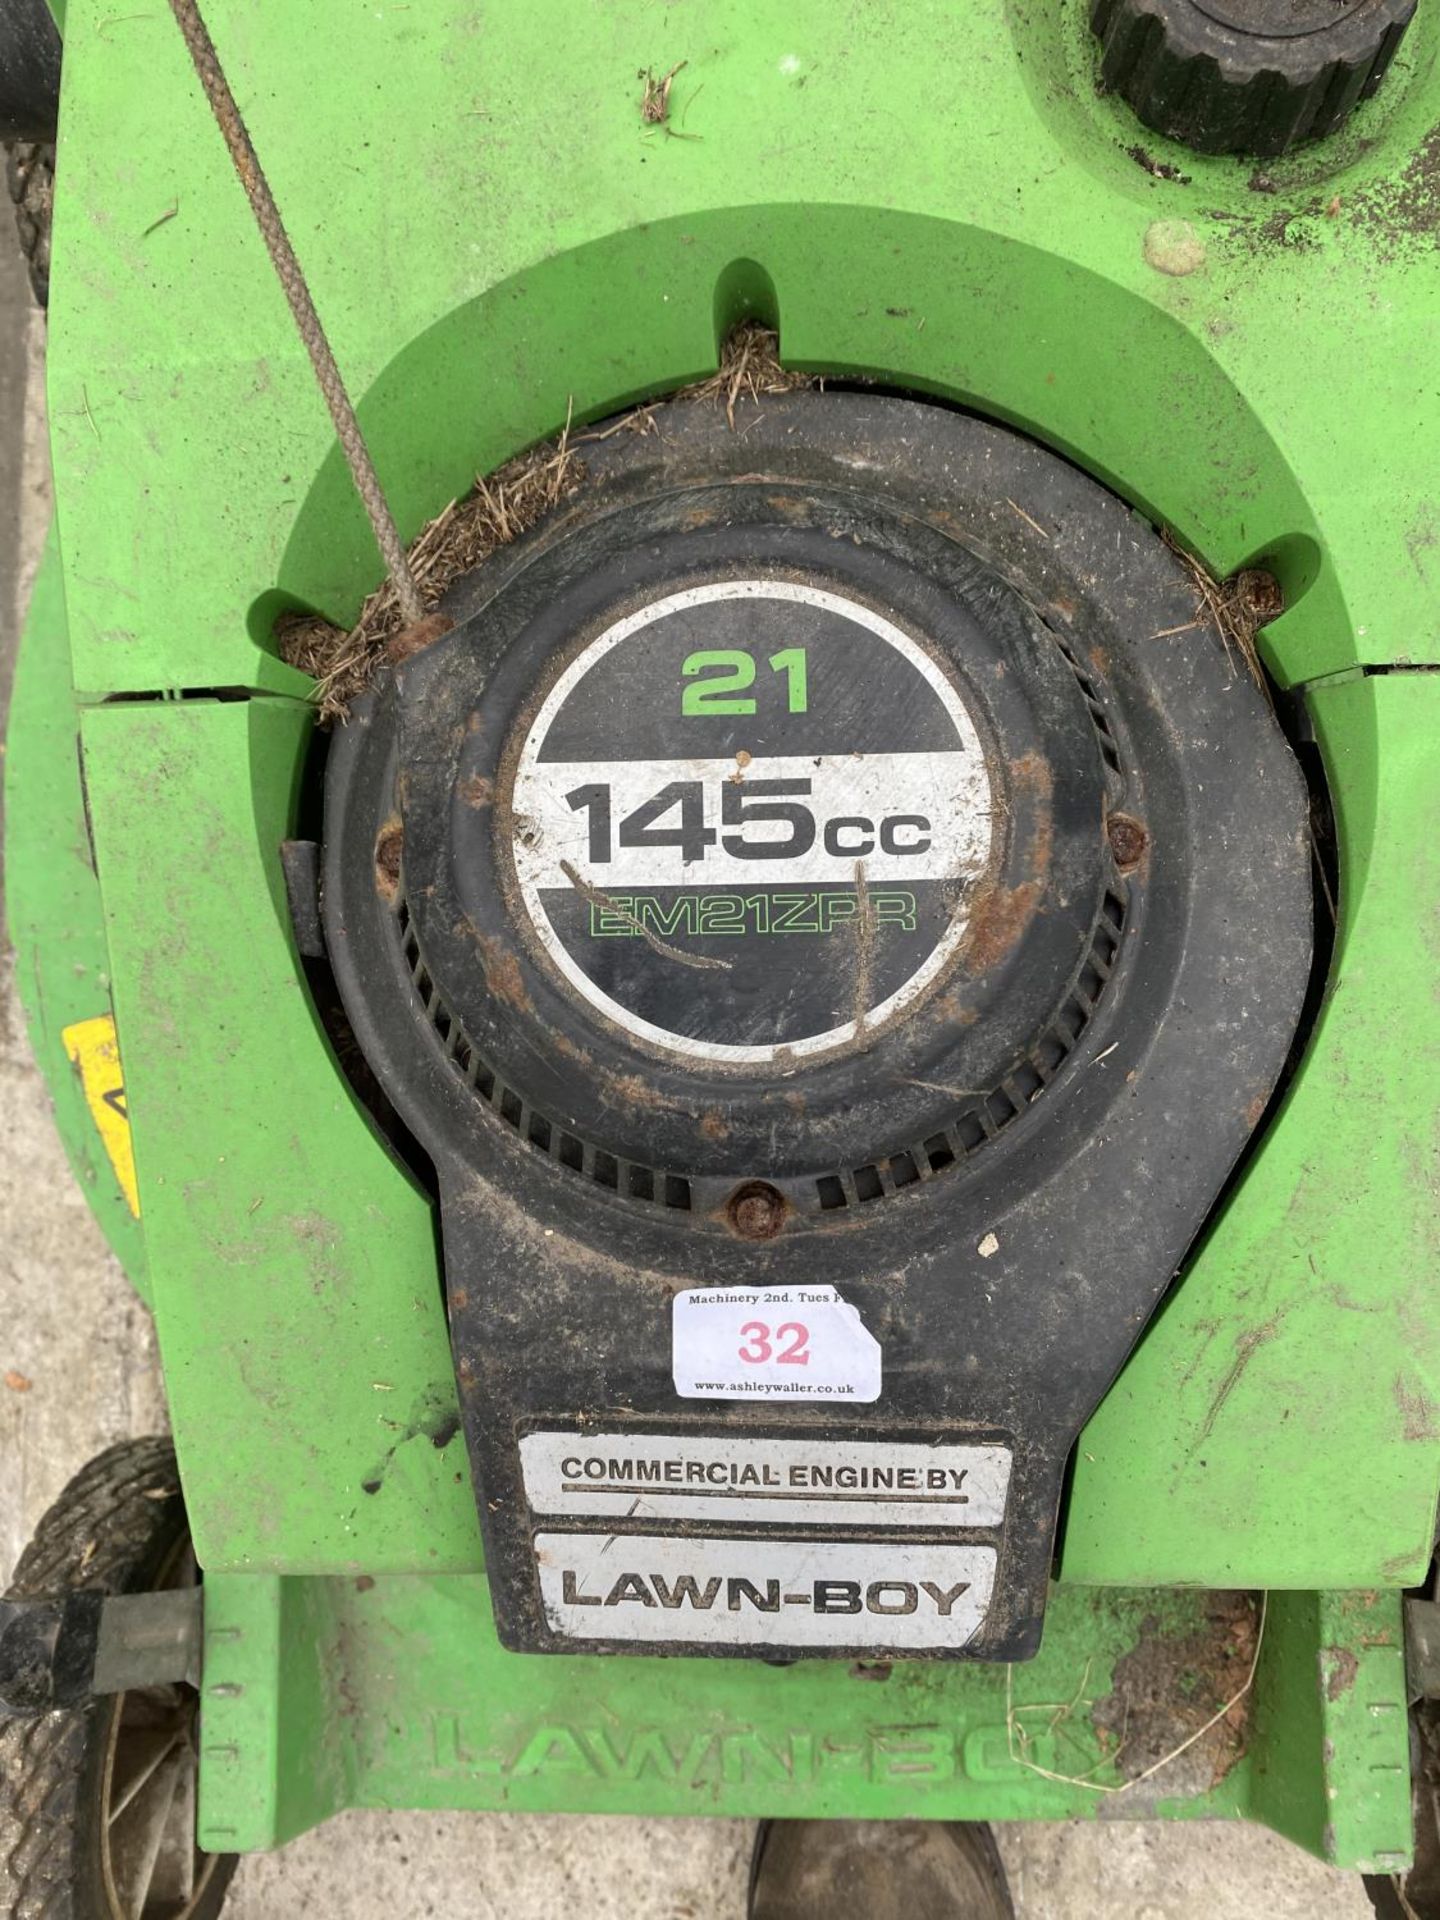 A LAWN-BOY 21 EM21SPR ROTARY MOWER FROM LOCAL CHRIKET CLUB NO VAT - PROCEEDS TO CHARITY - Image 2 of 2